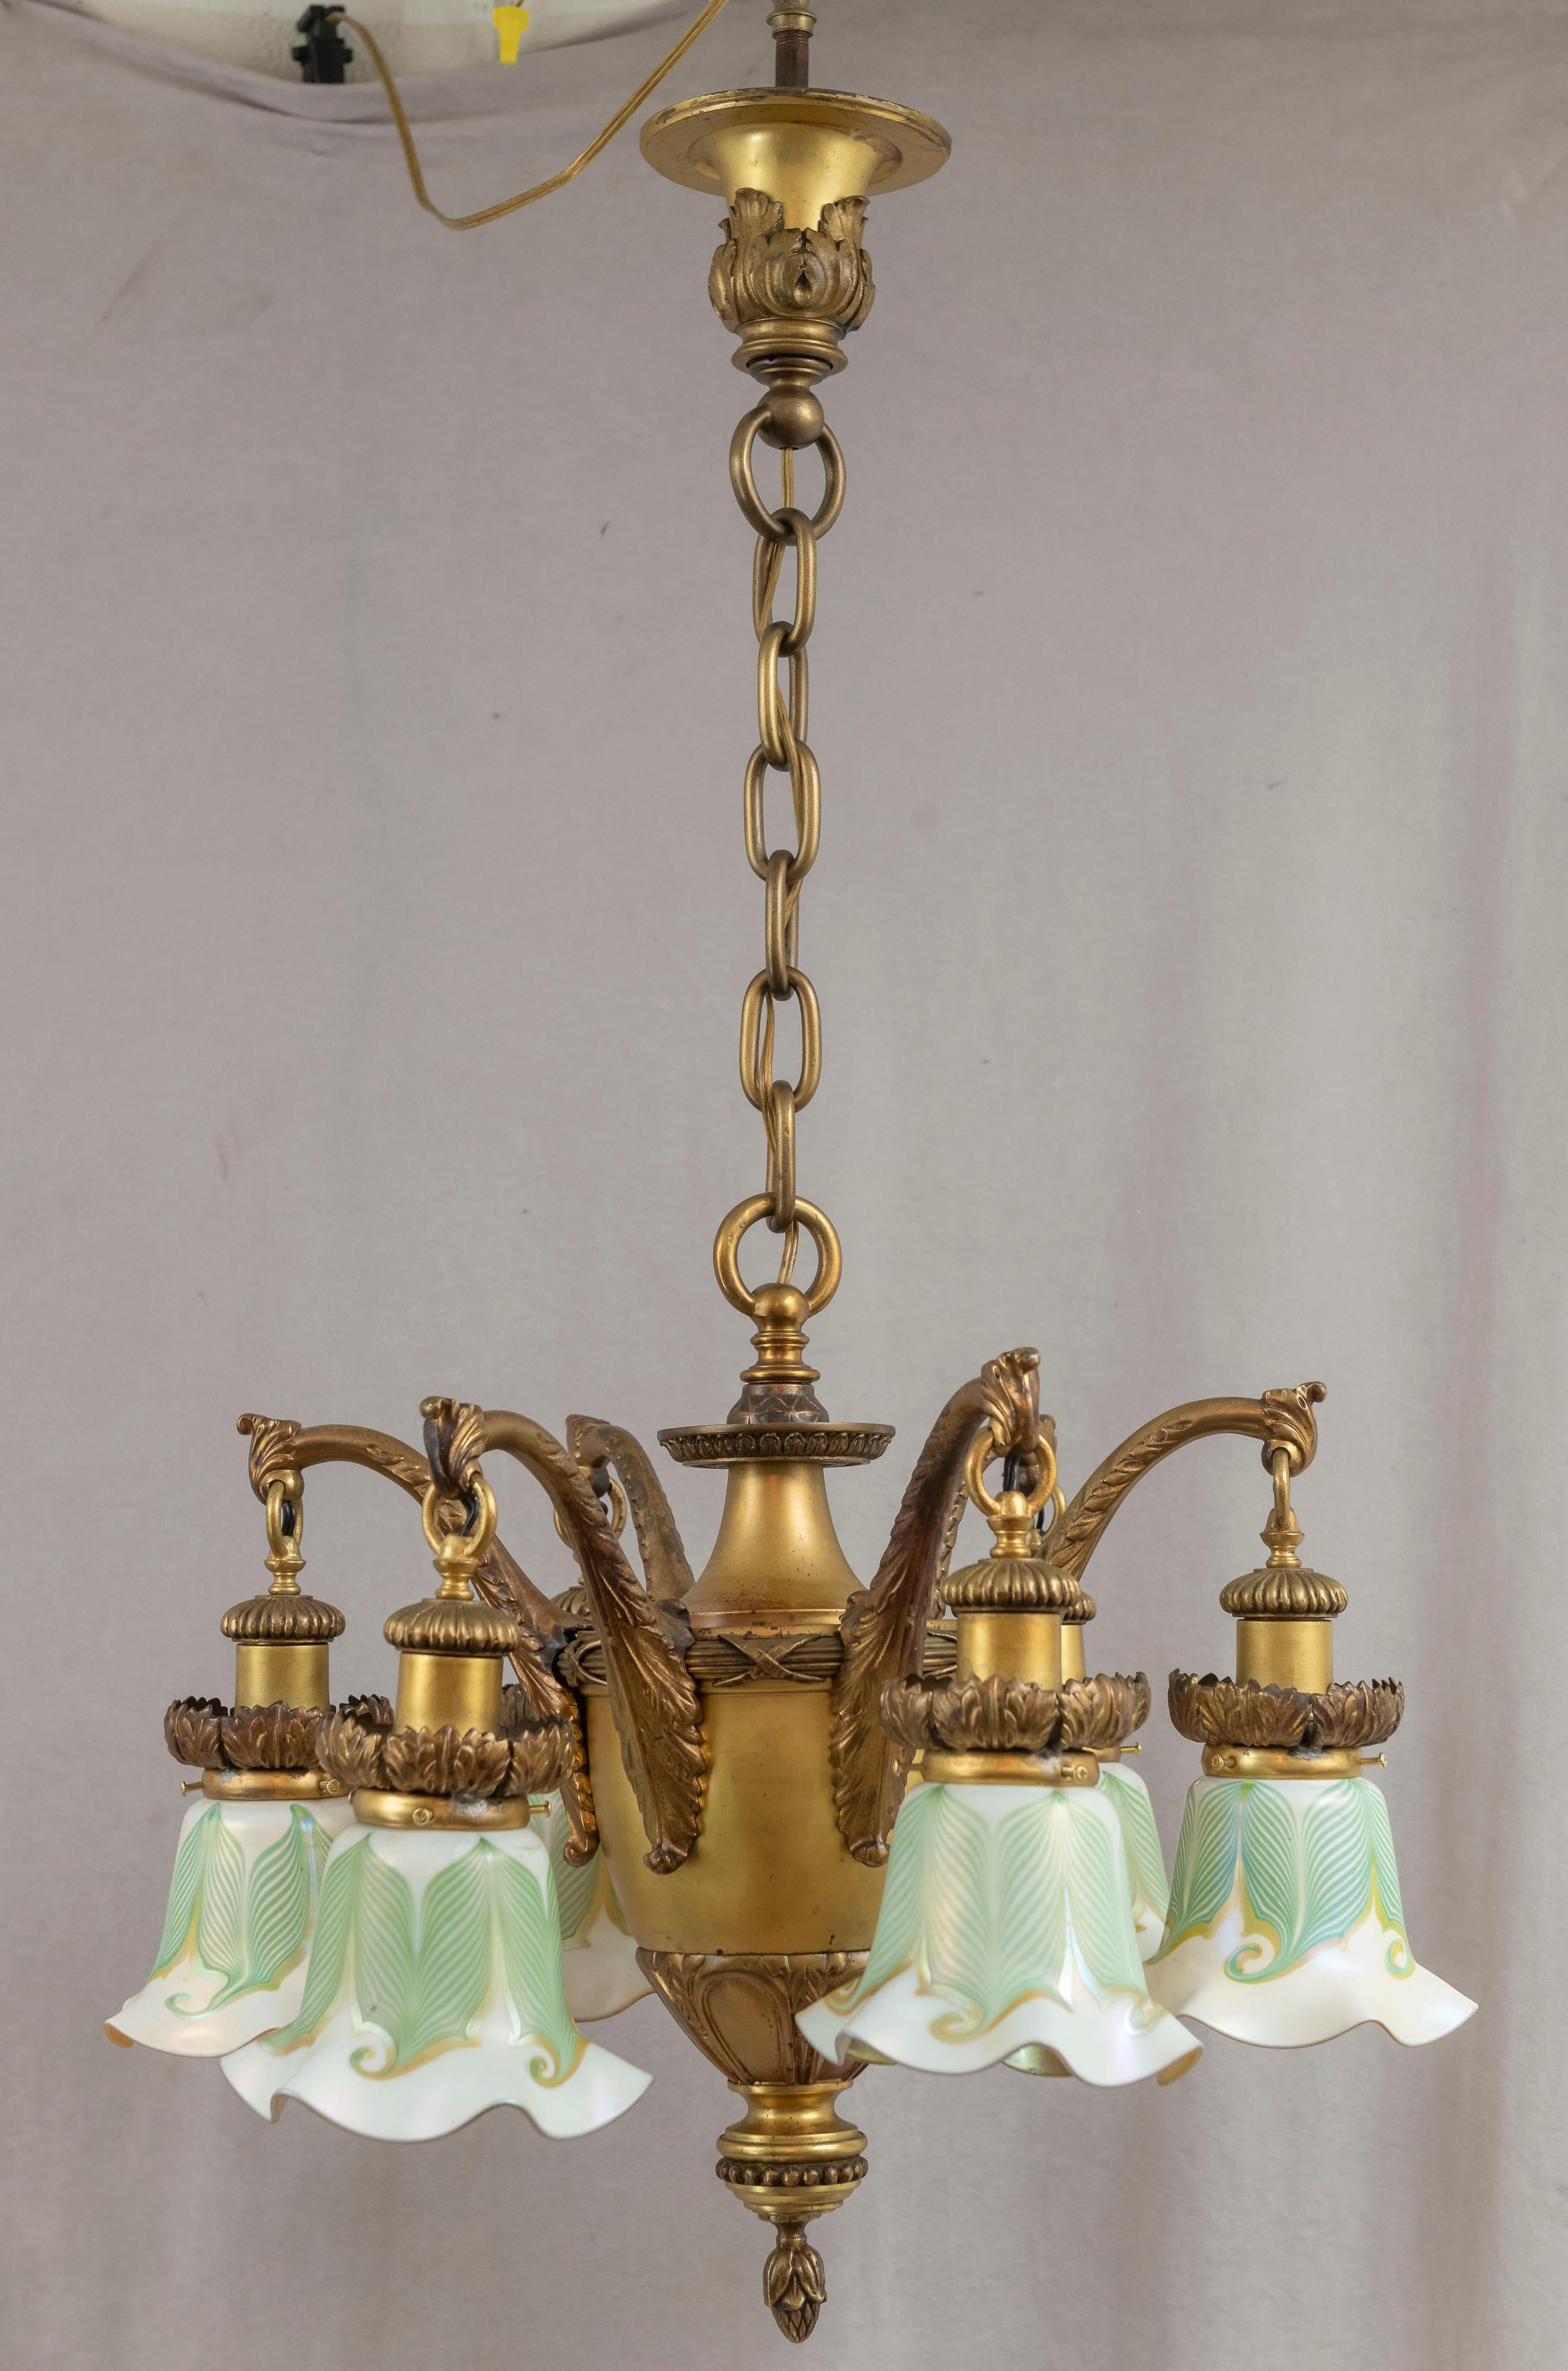 Bronze 6 Arm Edwardian Chandelier w/ Hand Blown Shades all Signed by Quezal ca. 1910